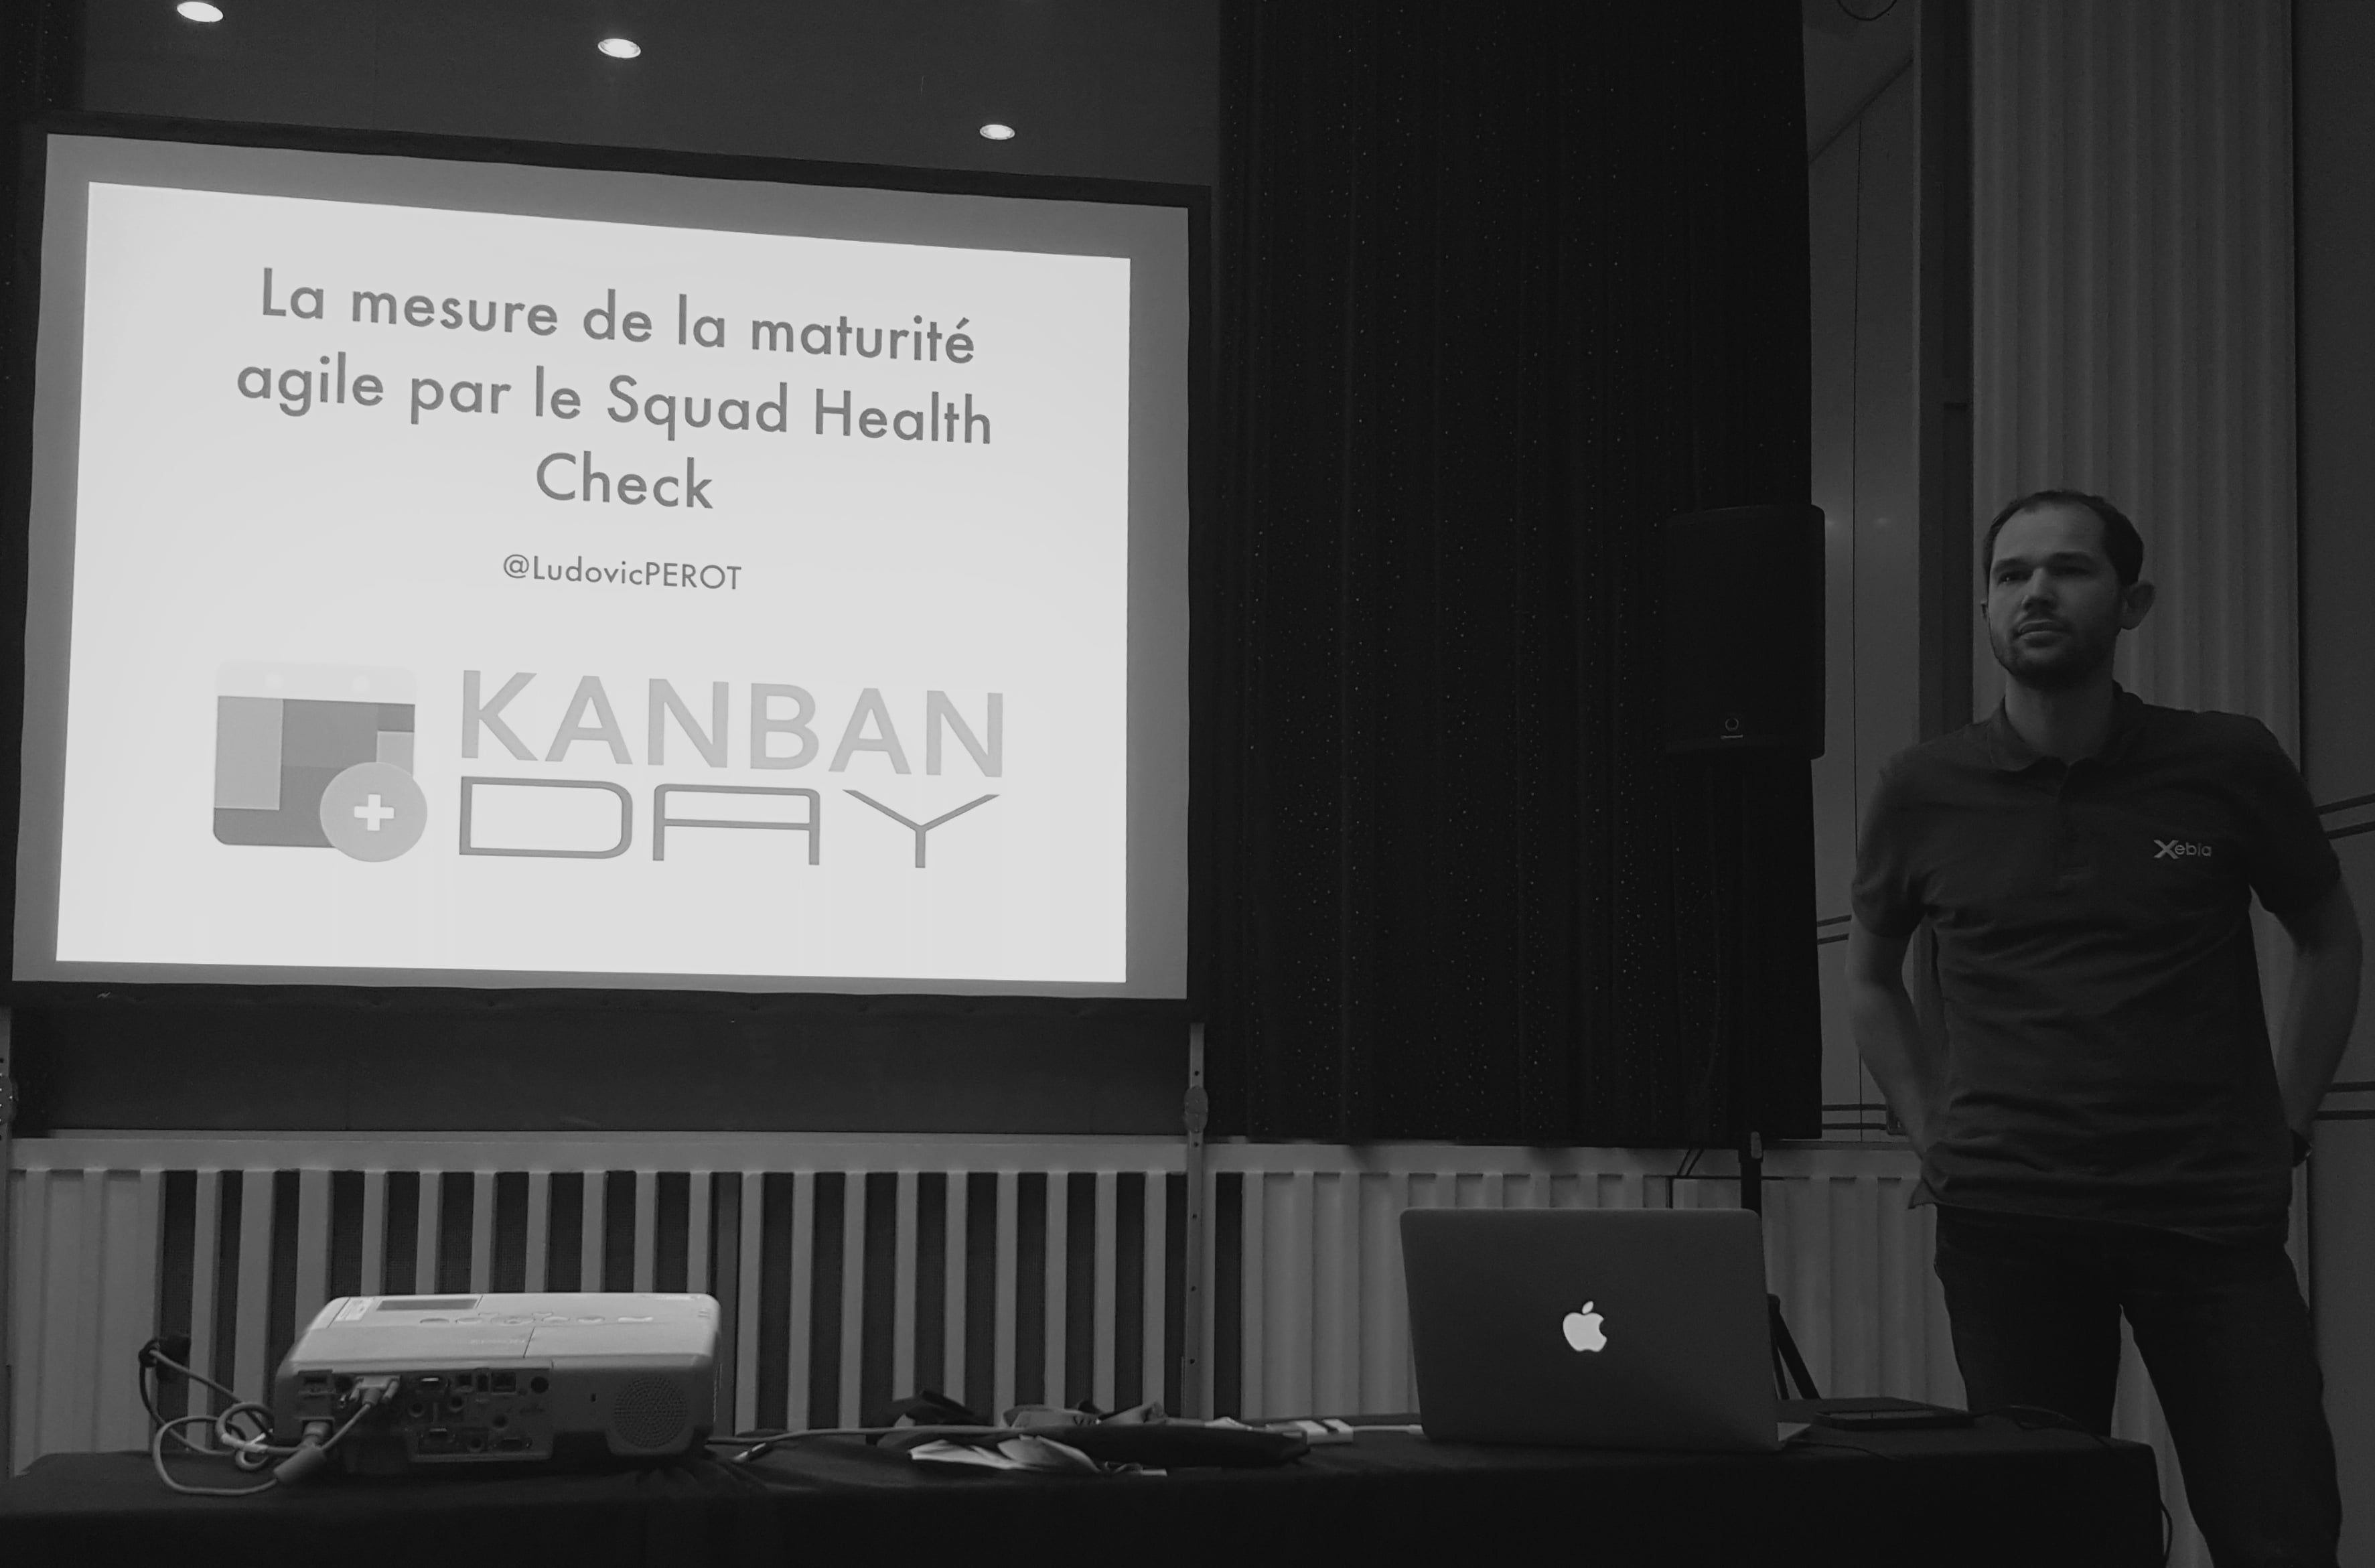 squad-health-check-ludovic-perot-kanban-day